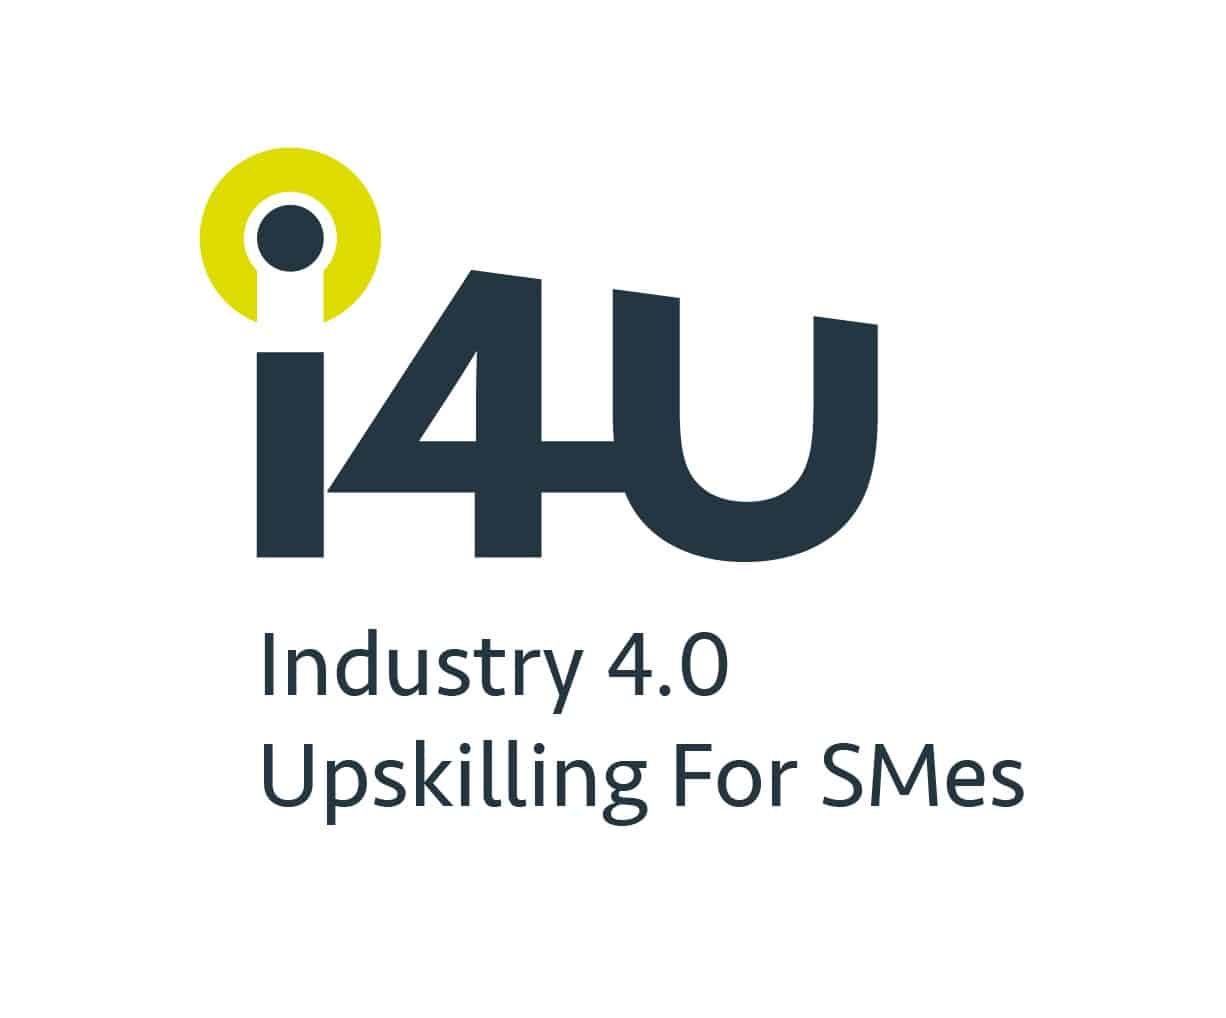 Industry 4.0 upskilling for SMEs